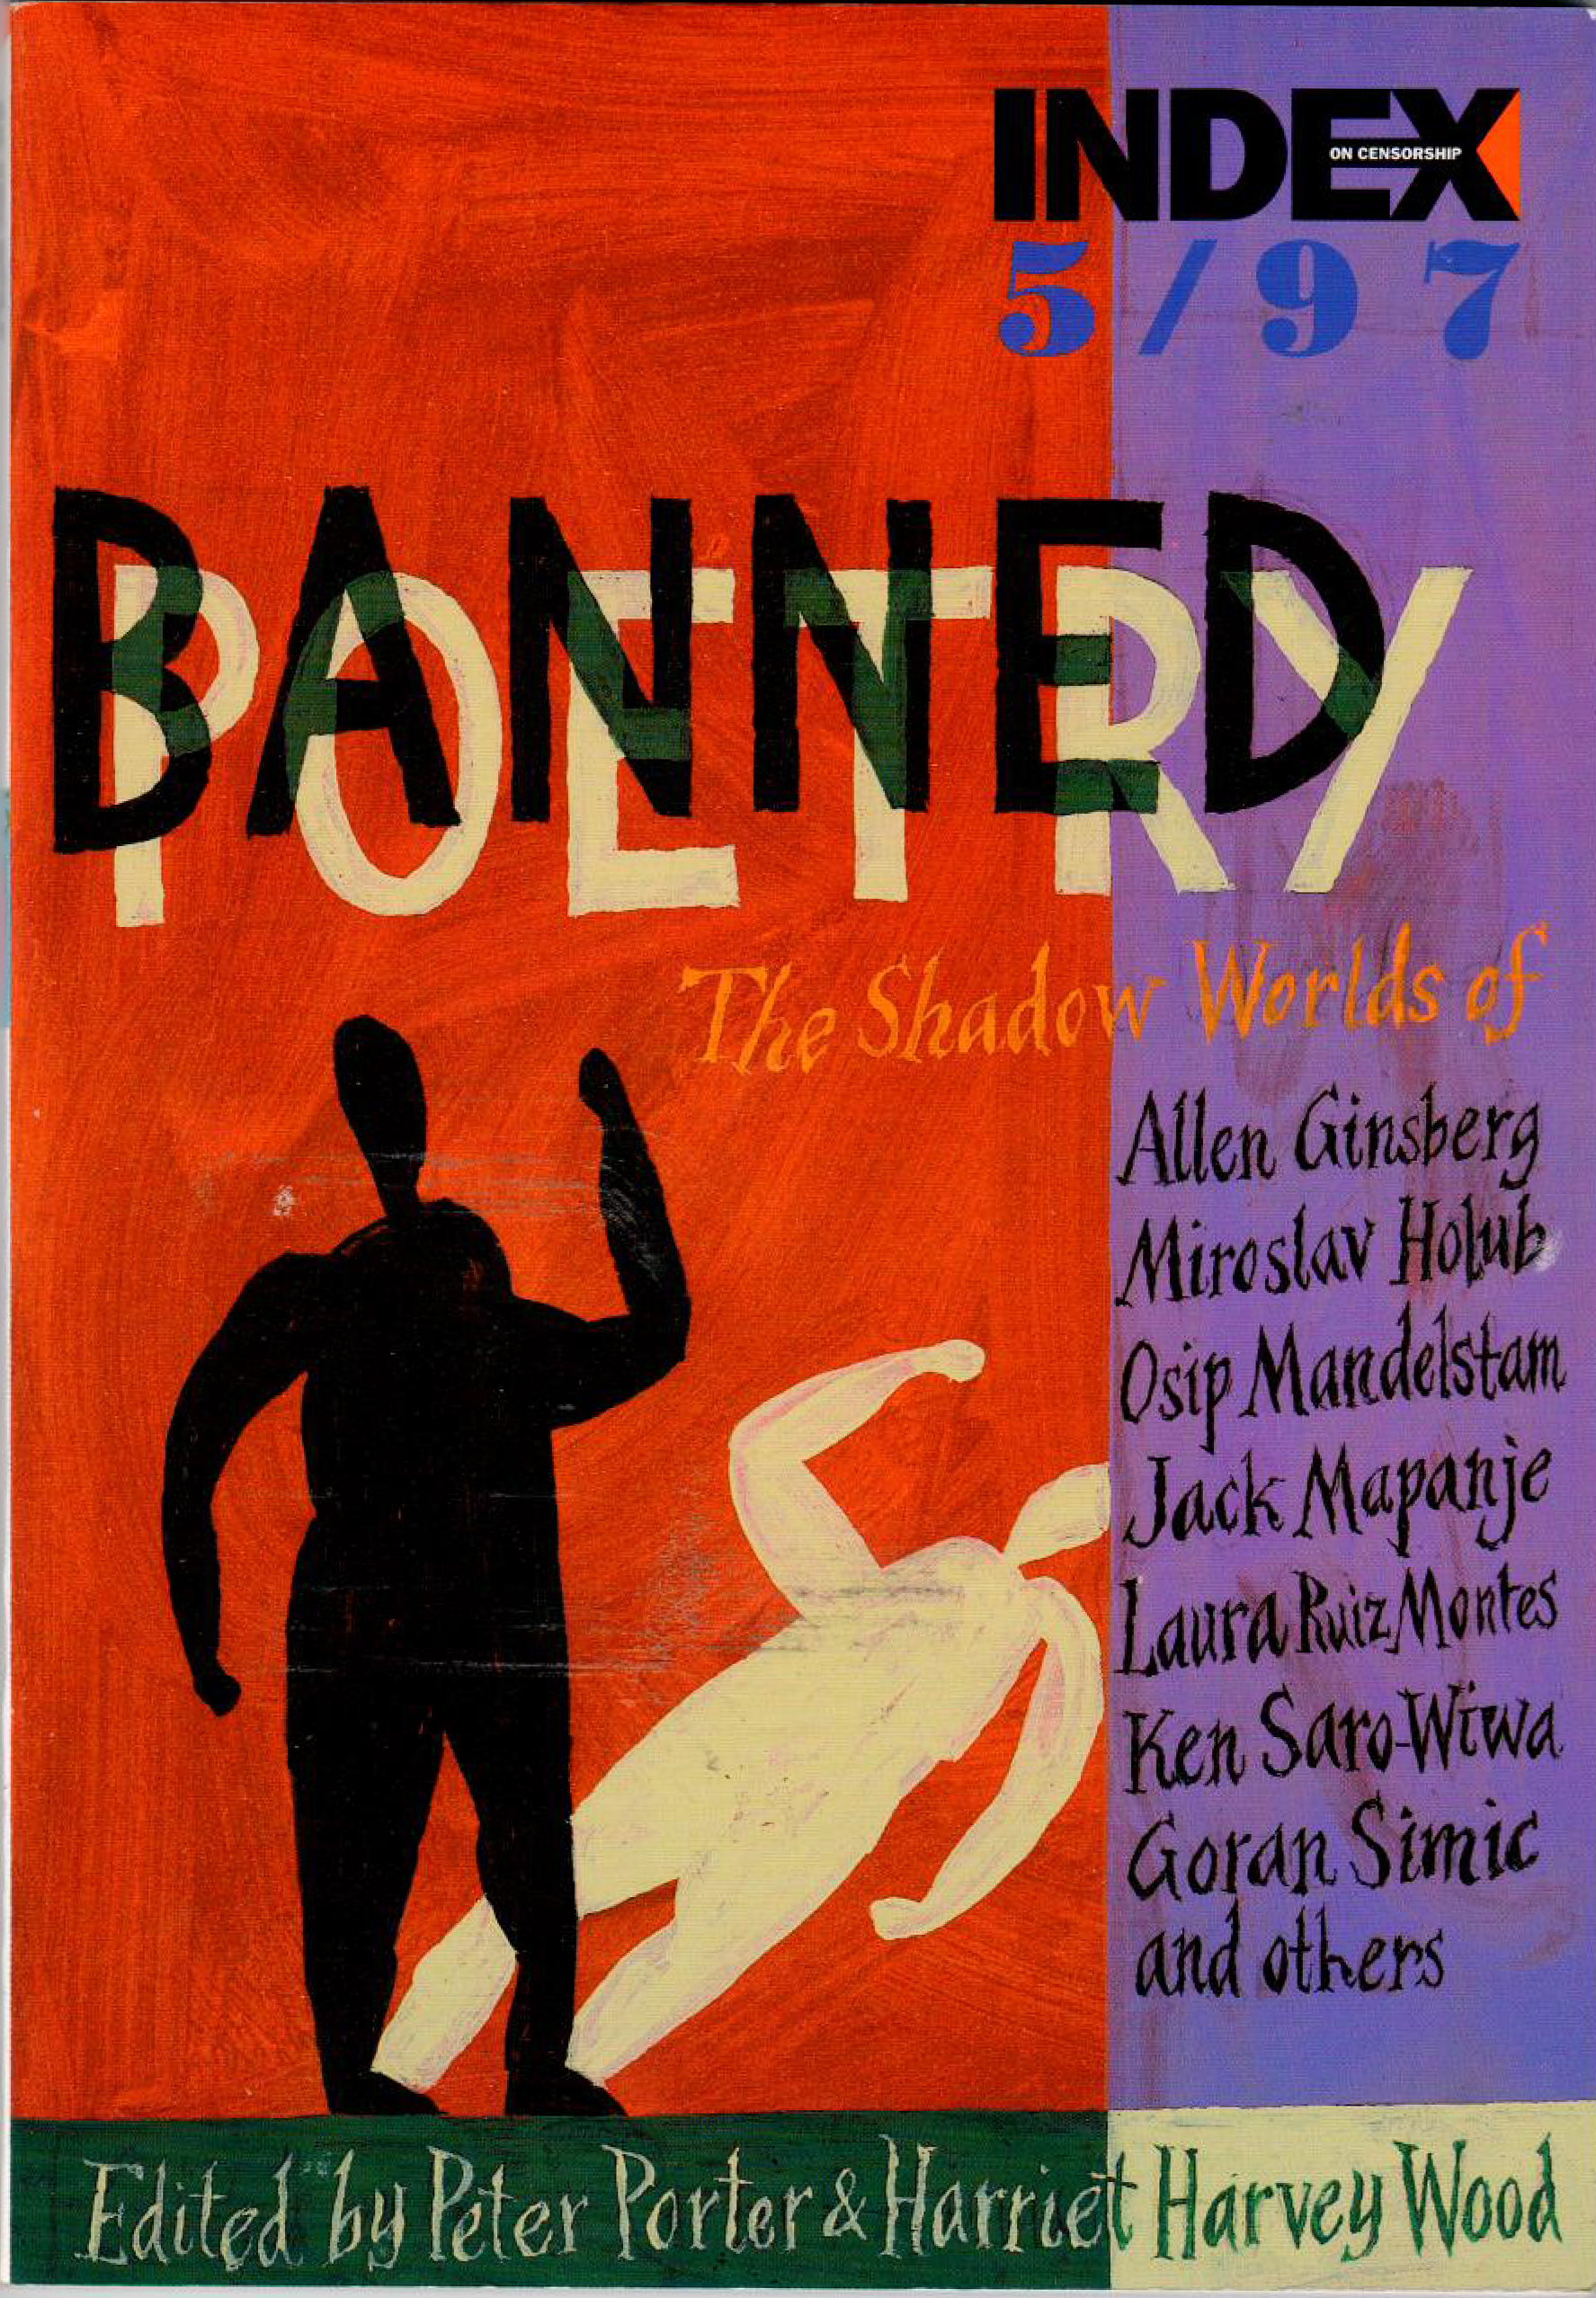 Banned poetry